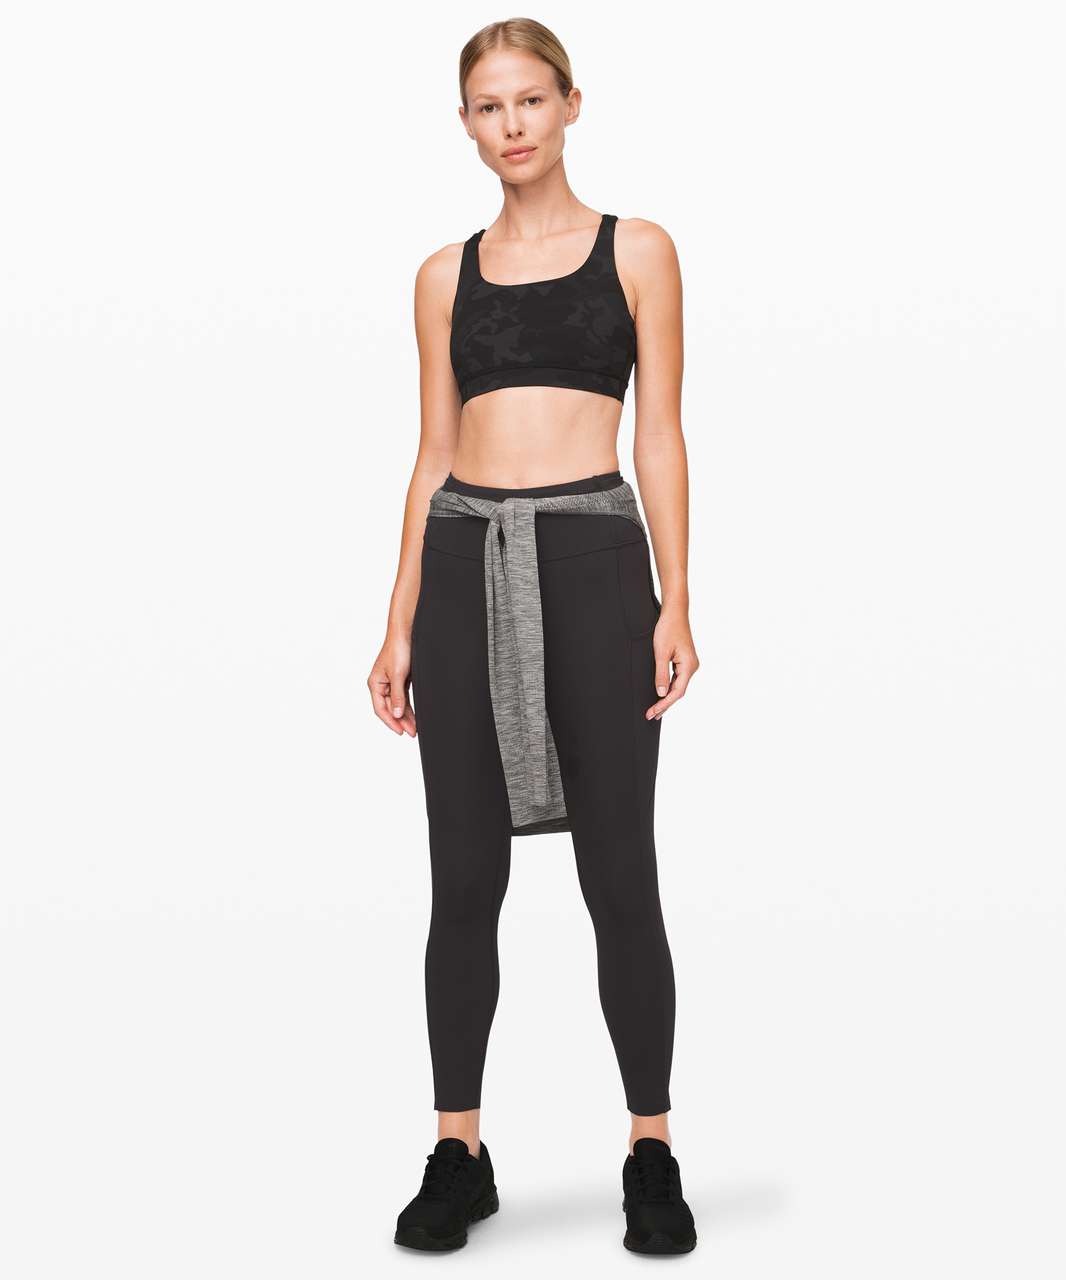 Lululemon Fast and Free Tight II 25" *Non-Reflective Nulux - Intergalactic